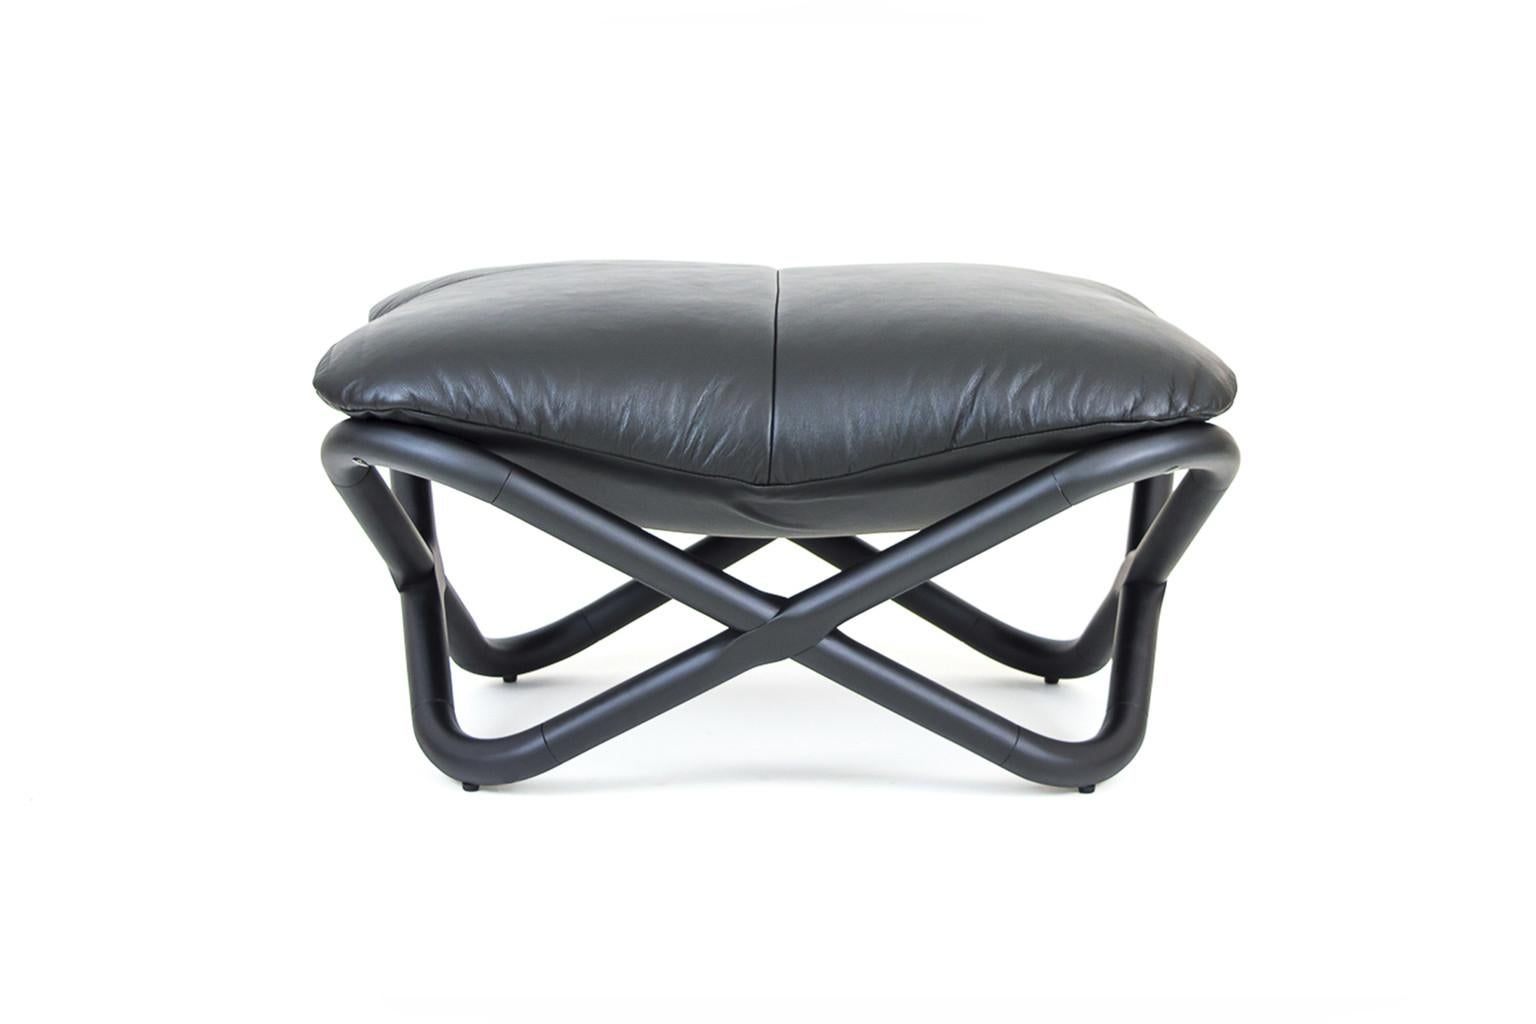 Astral Brazilian Contemporary Wood and Leather Easychair and Pouf by Lattoog In New Condition For Sale In Sao Paolo, BR